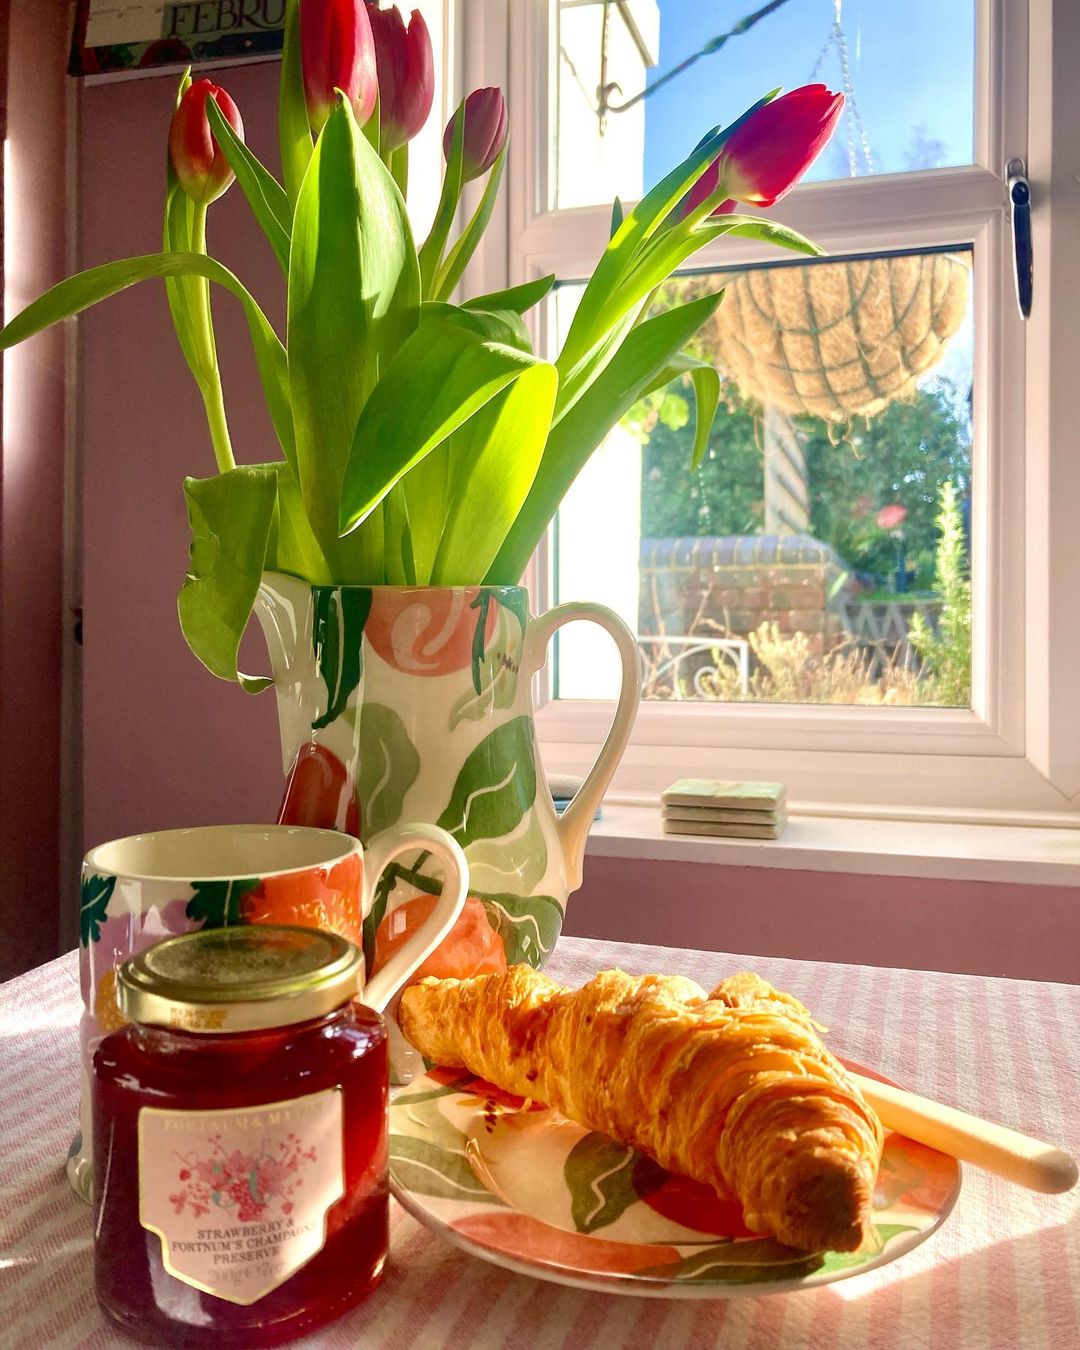 Morning Glow: Bright Tulips and Breakfast Delights